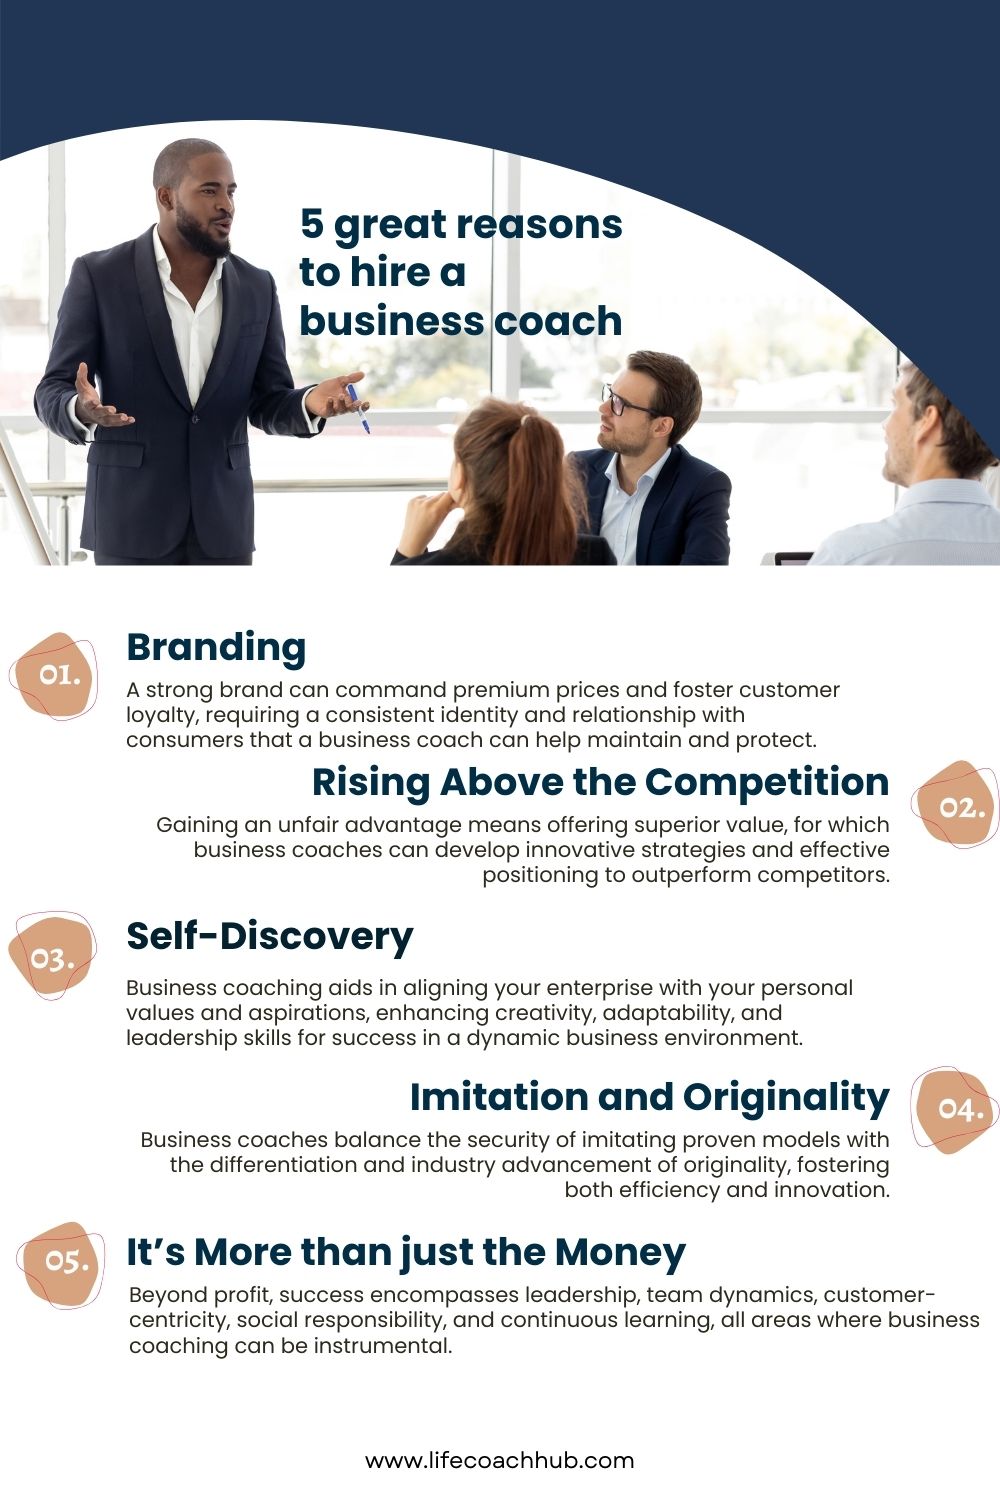 5 Great reasons to hire a business coach